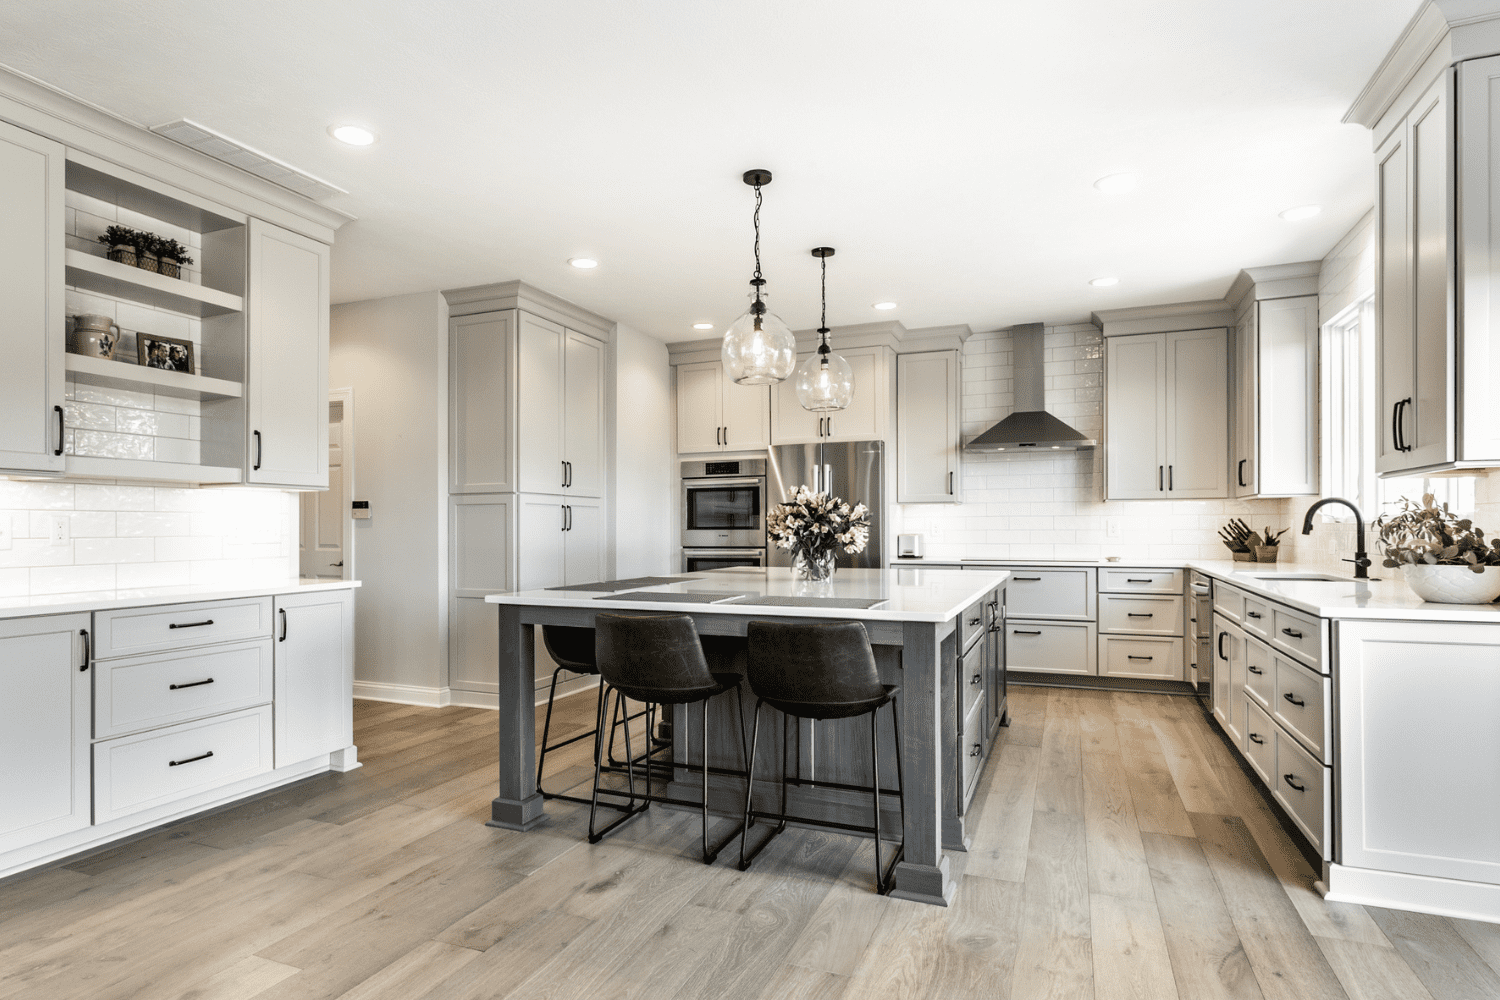 Nicholas Design Build | A kitchen with gray cabinets and hardwood floors.